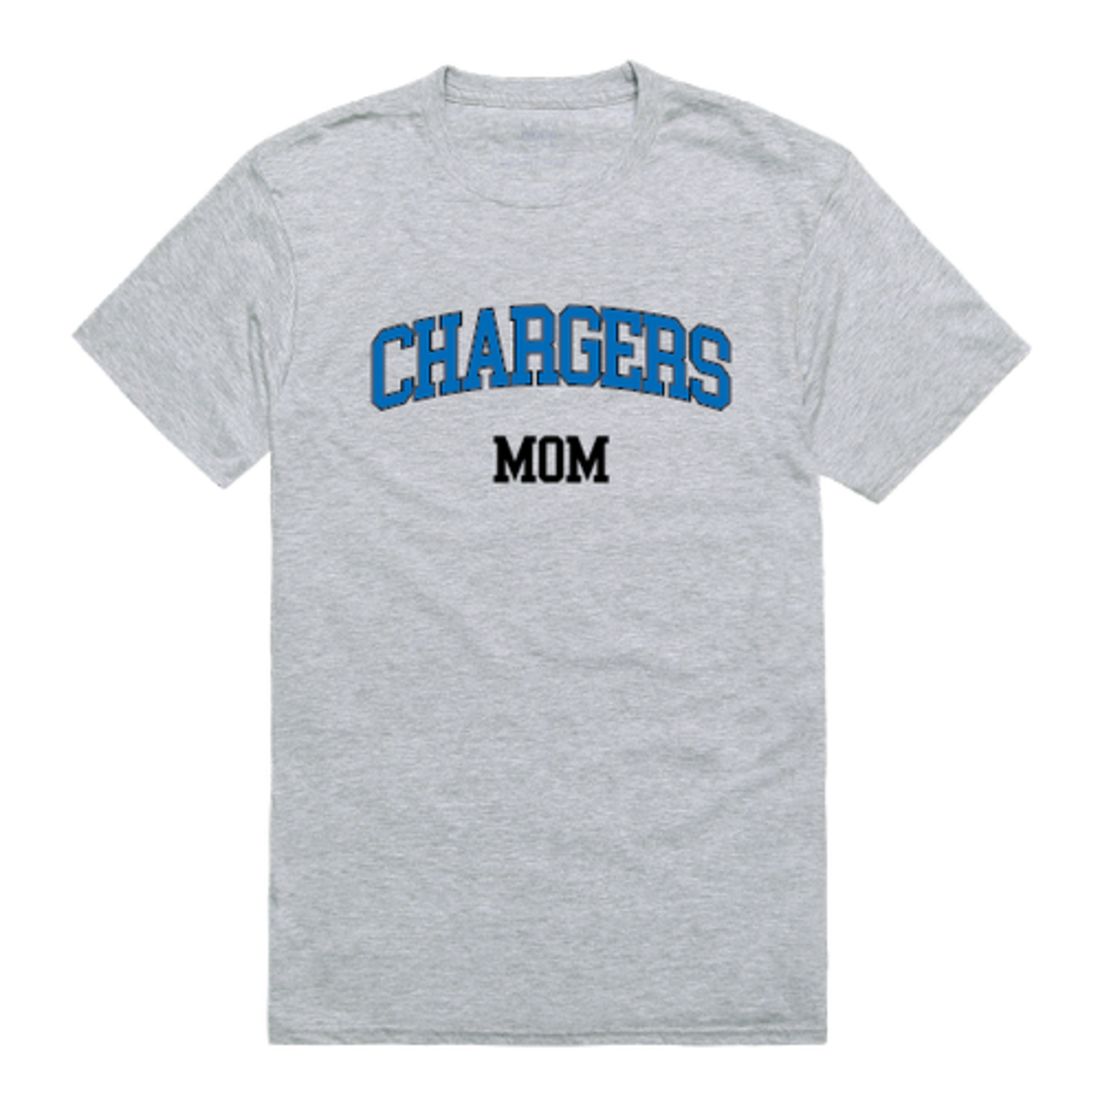 The University of Alabama in Huntsville Chargers Mom T-Shirt